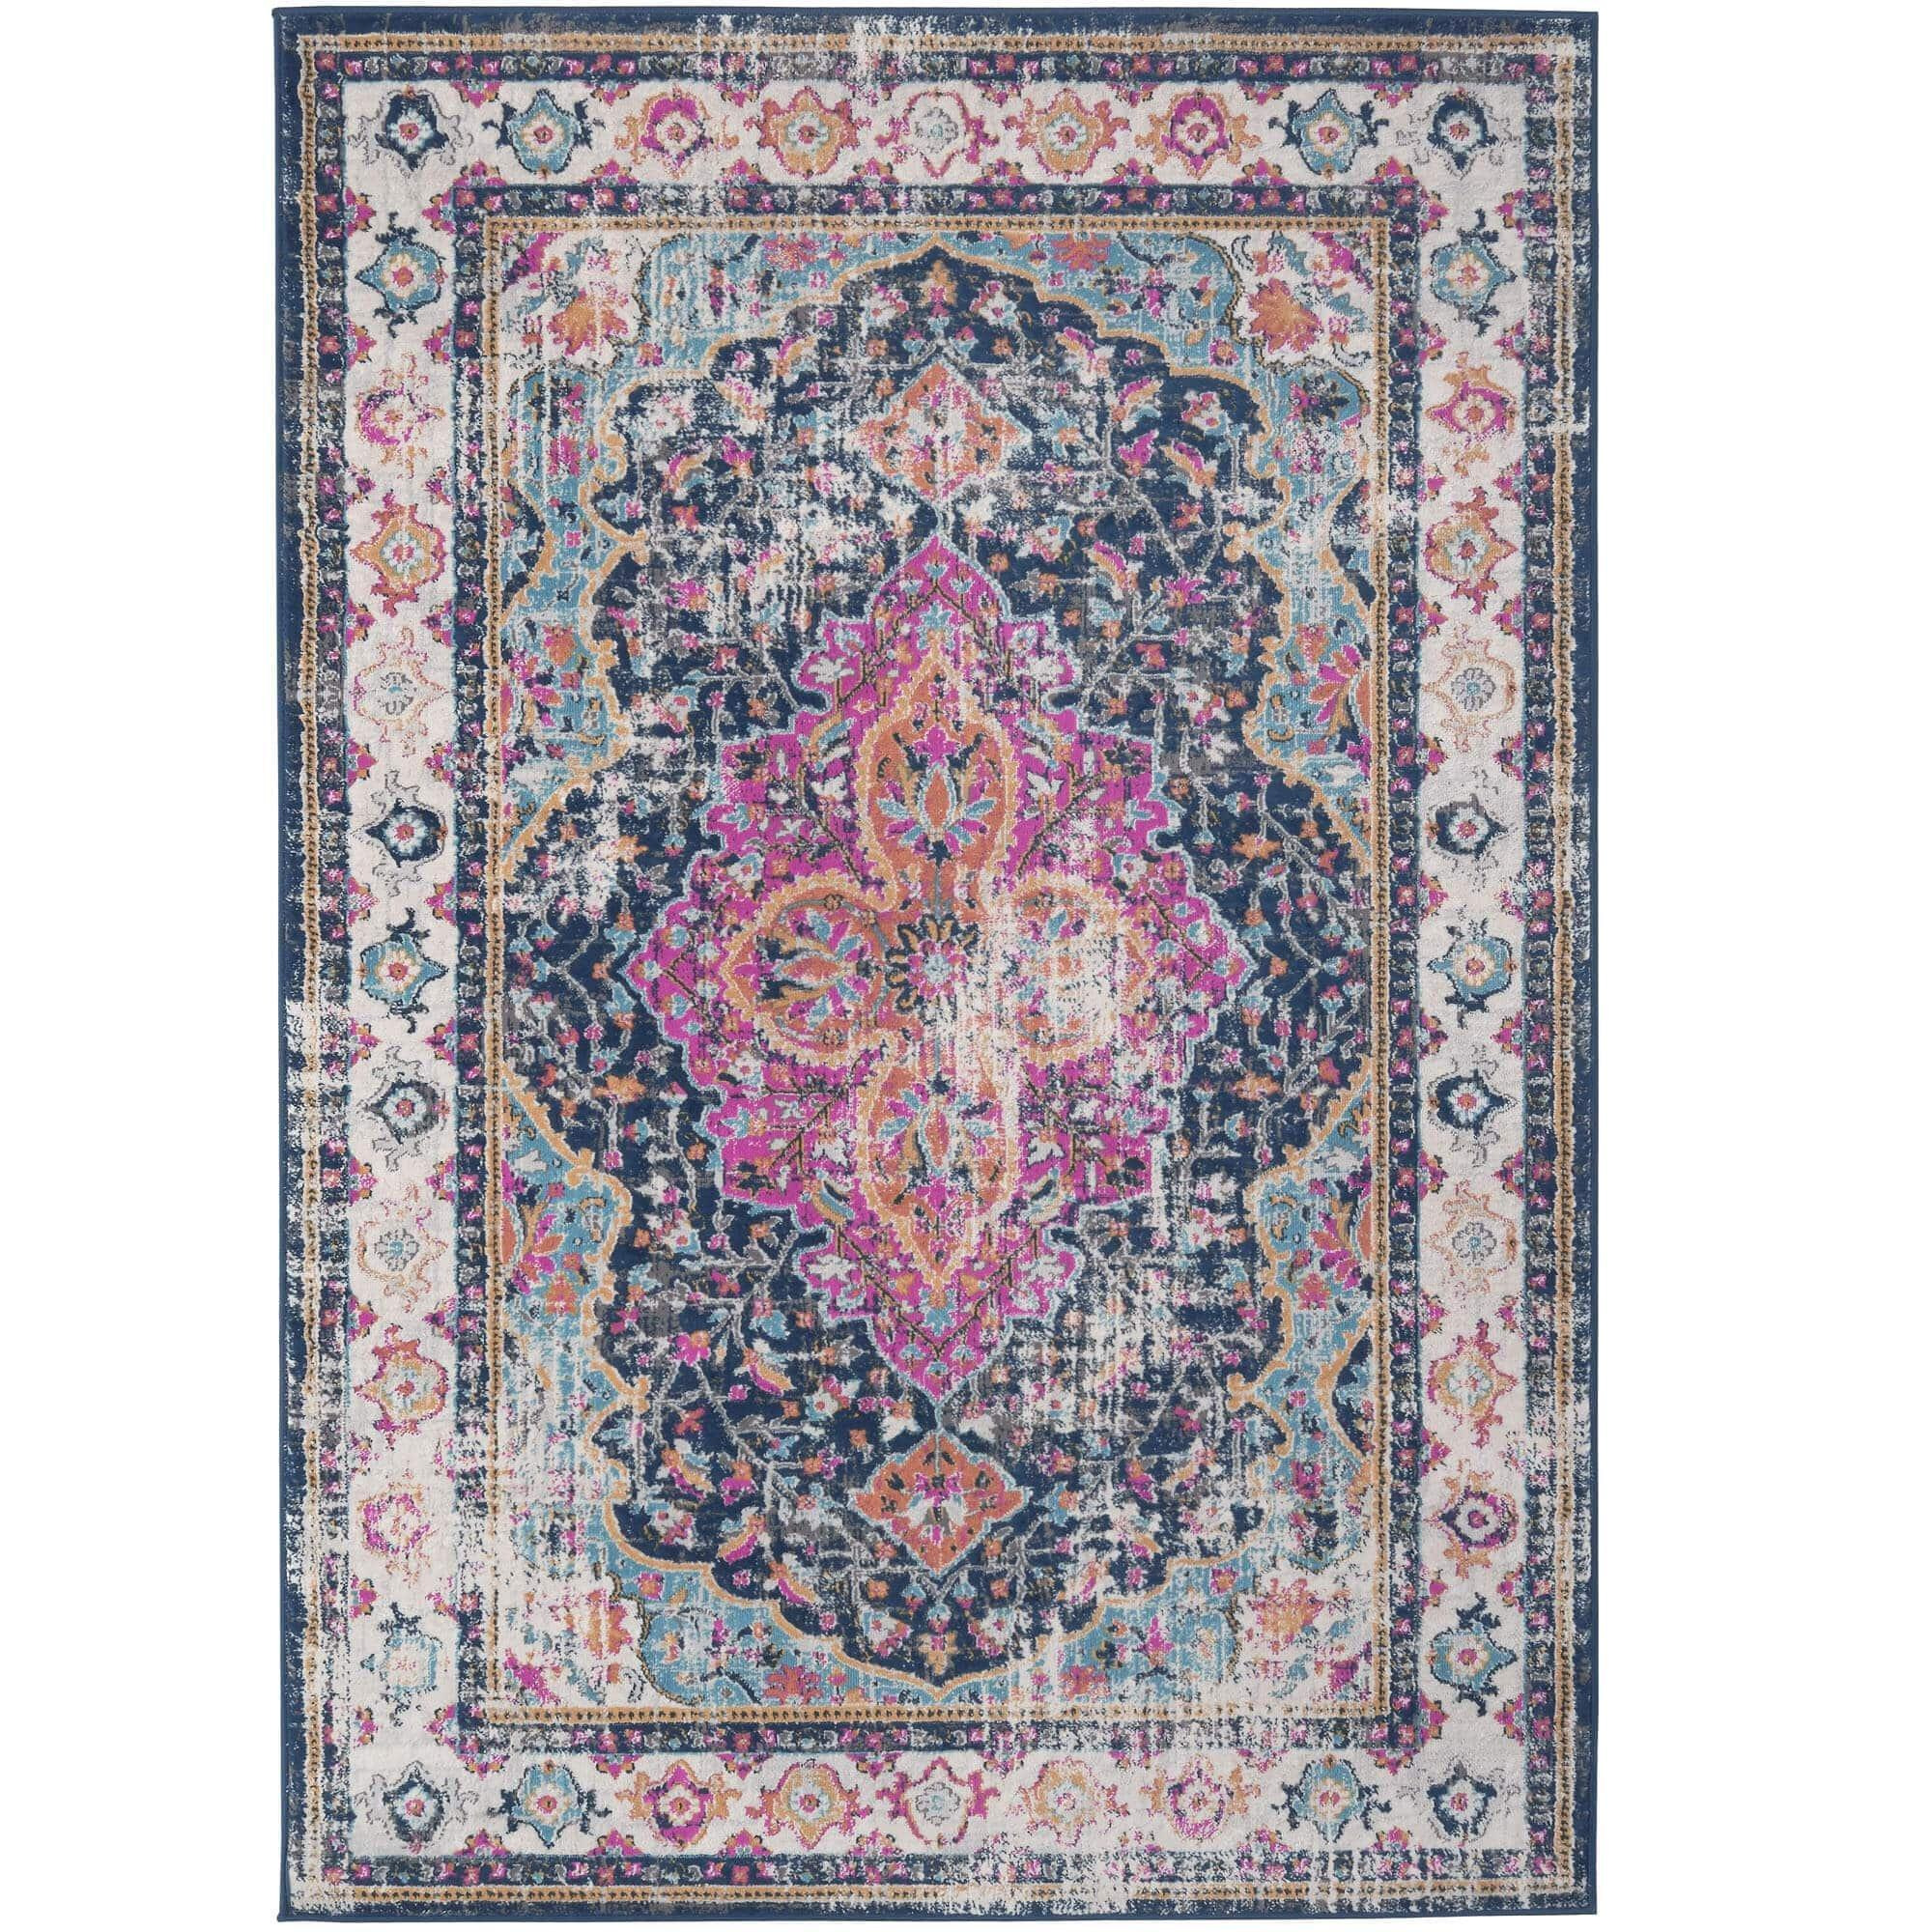 Marrakech Collection Vintage Rugs in Multicolour - 440 - image 1